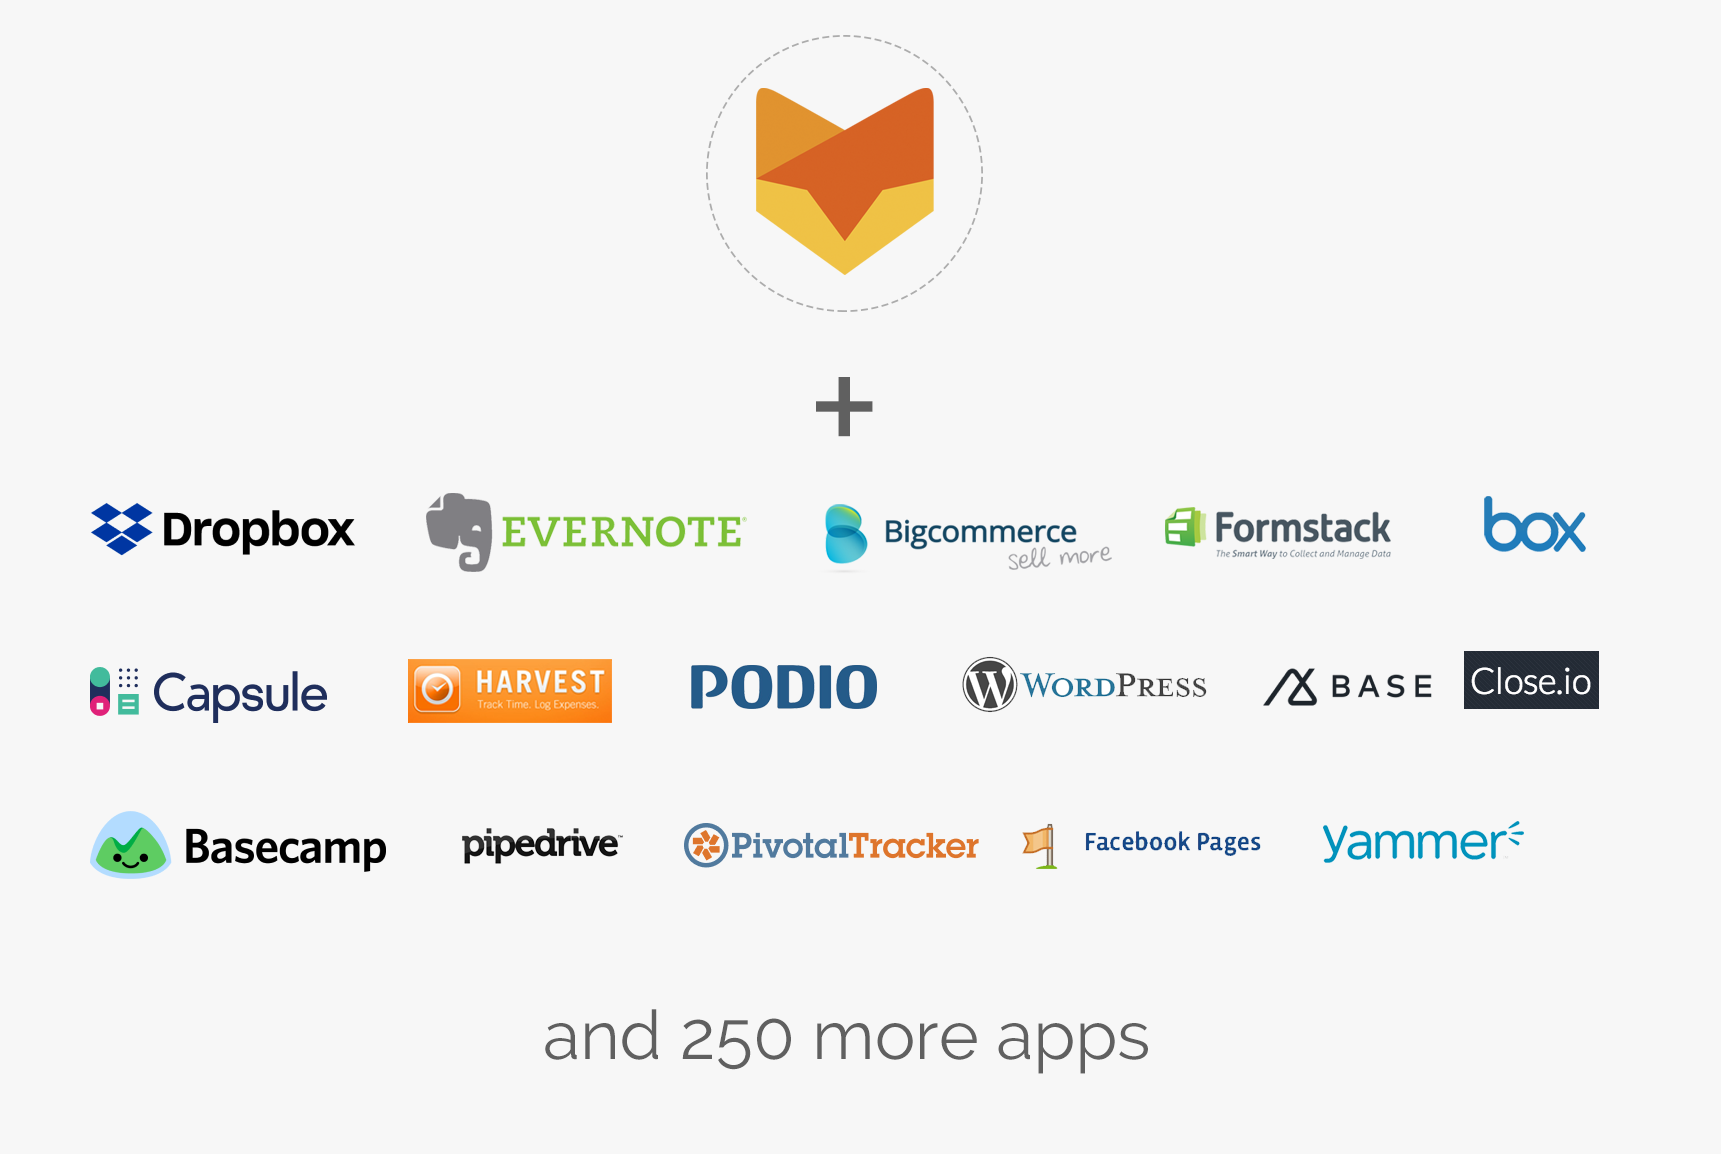 Zapier enables HappyFox to integrate with more than 250 web applications